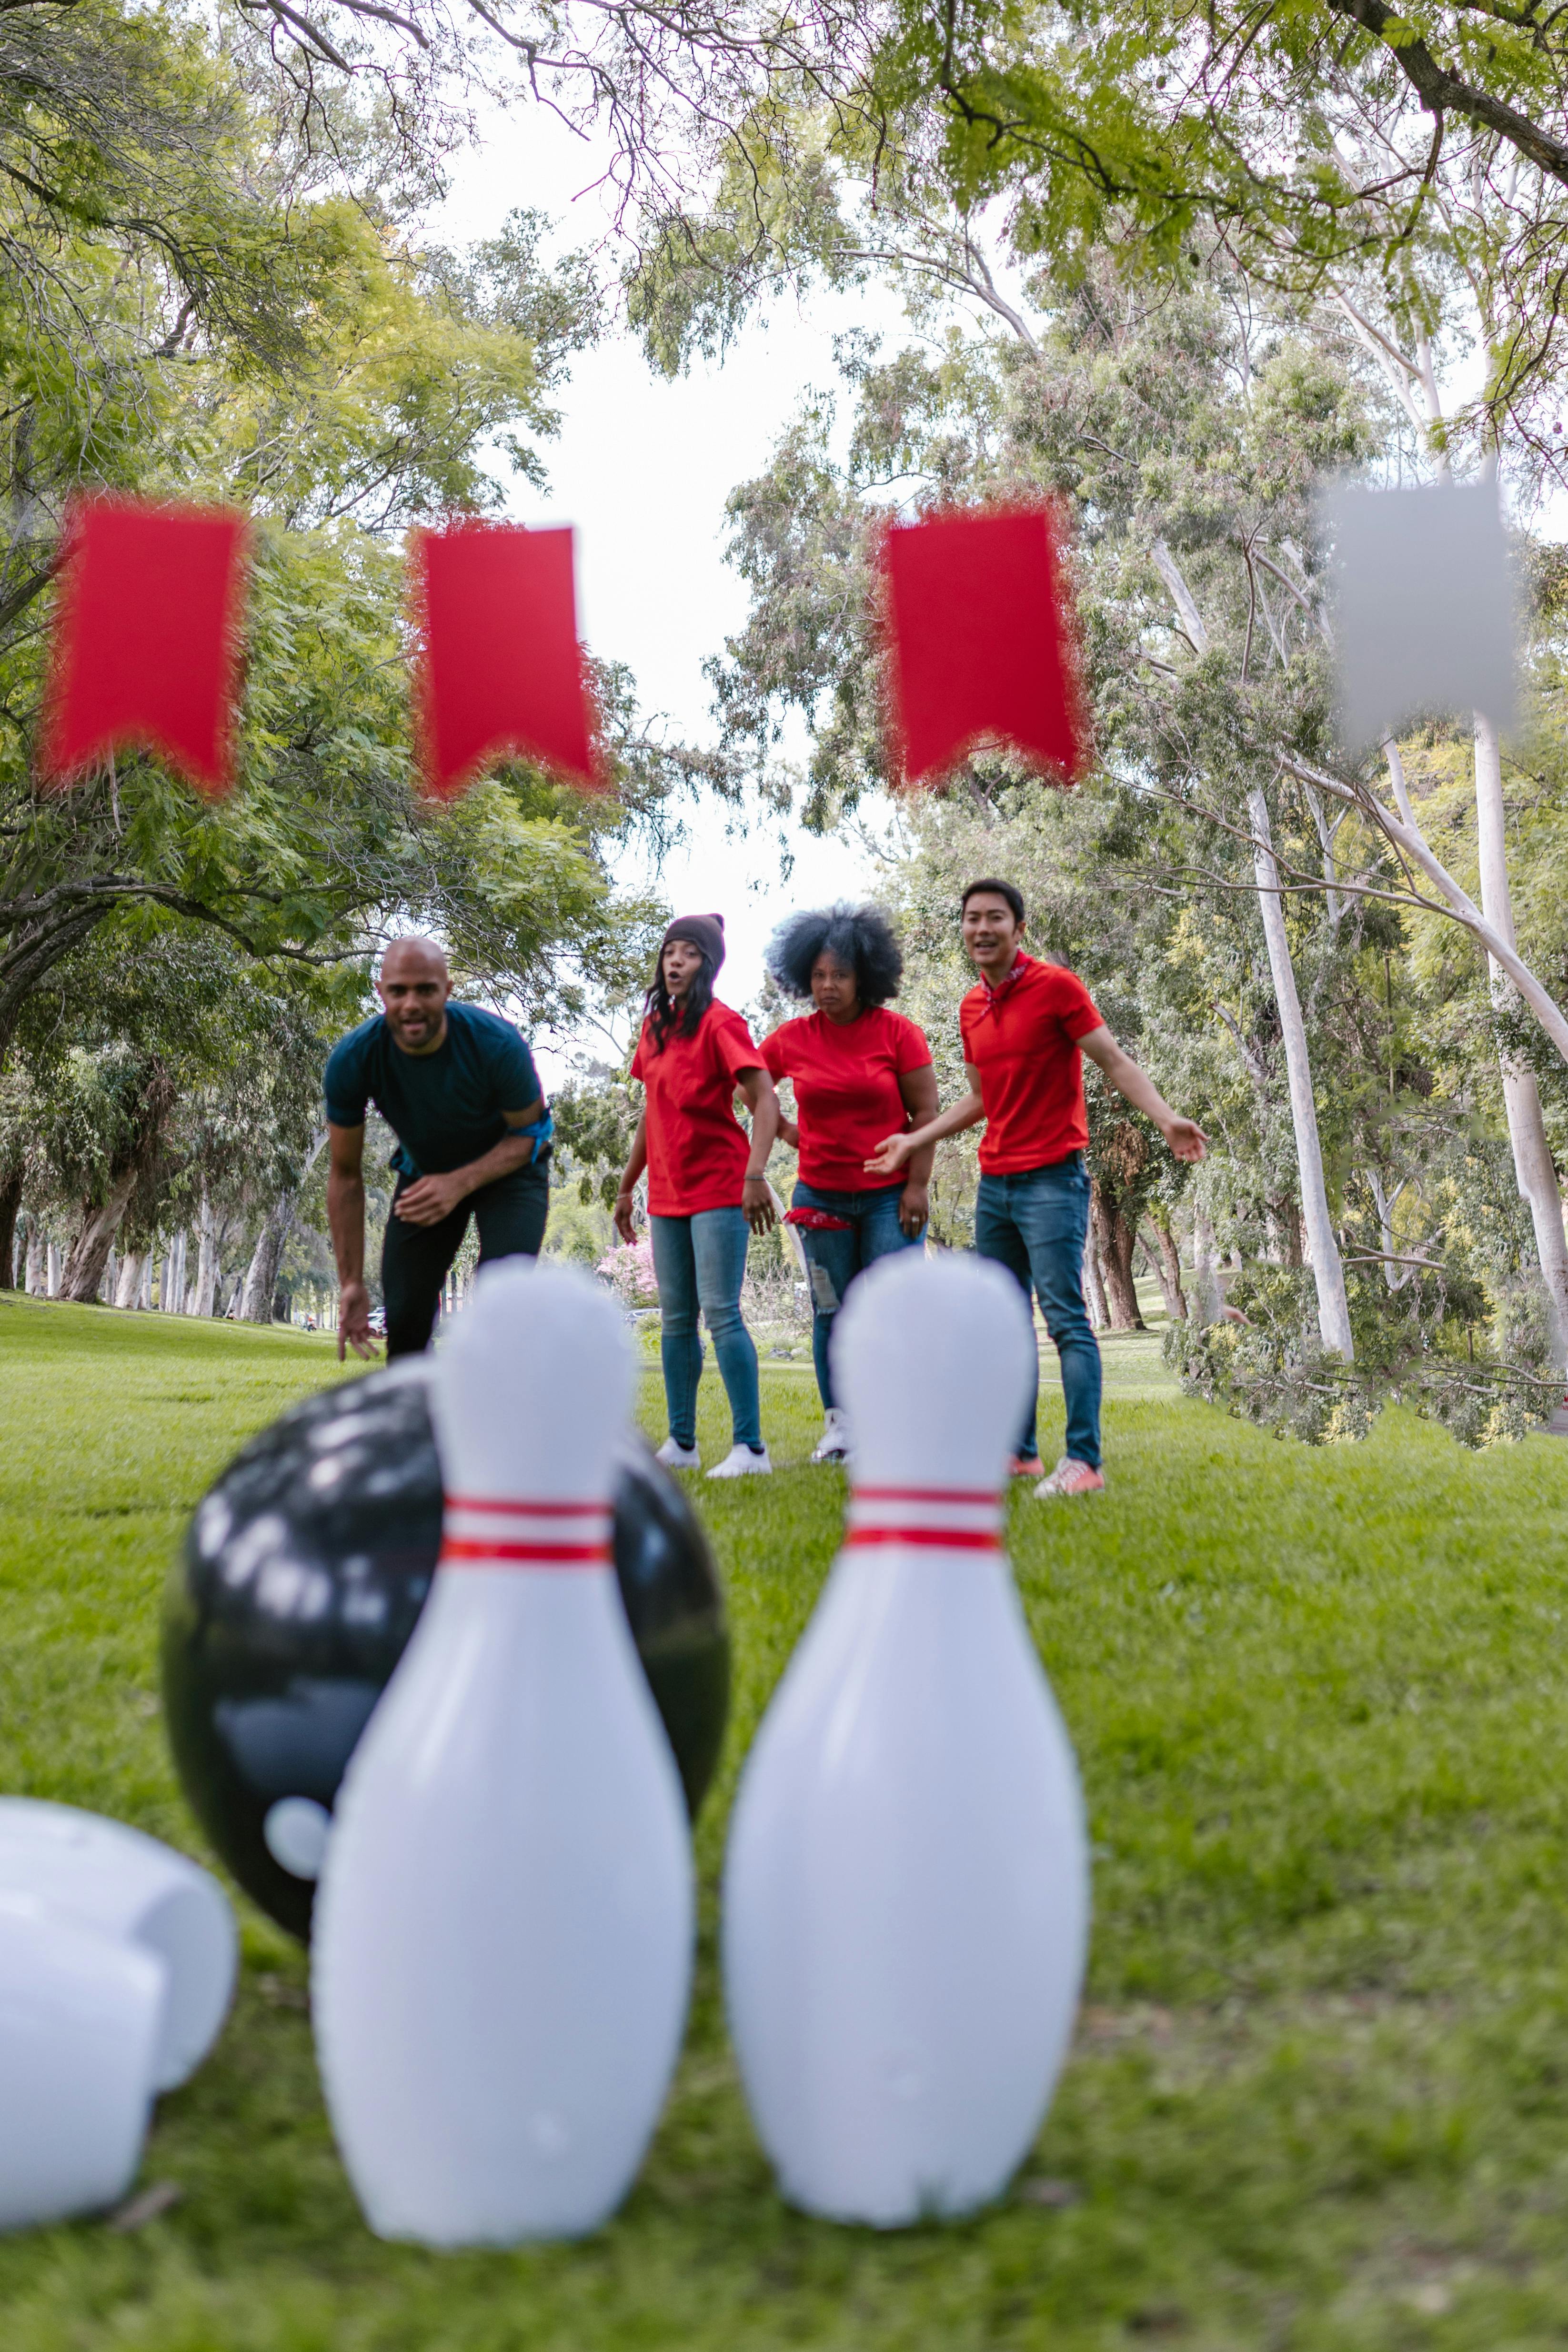 Group of People Playing Bowling On Grass · Free Stock Photo